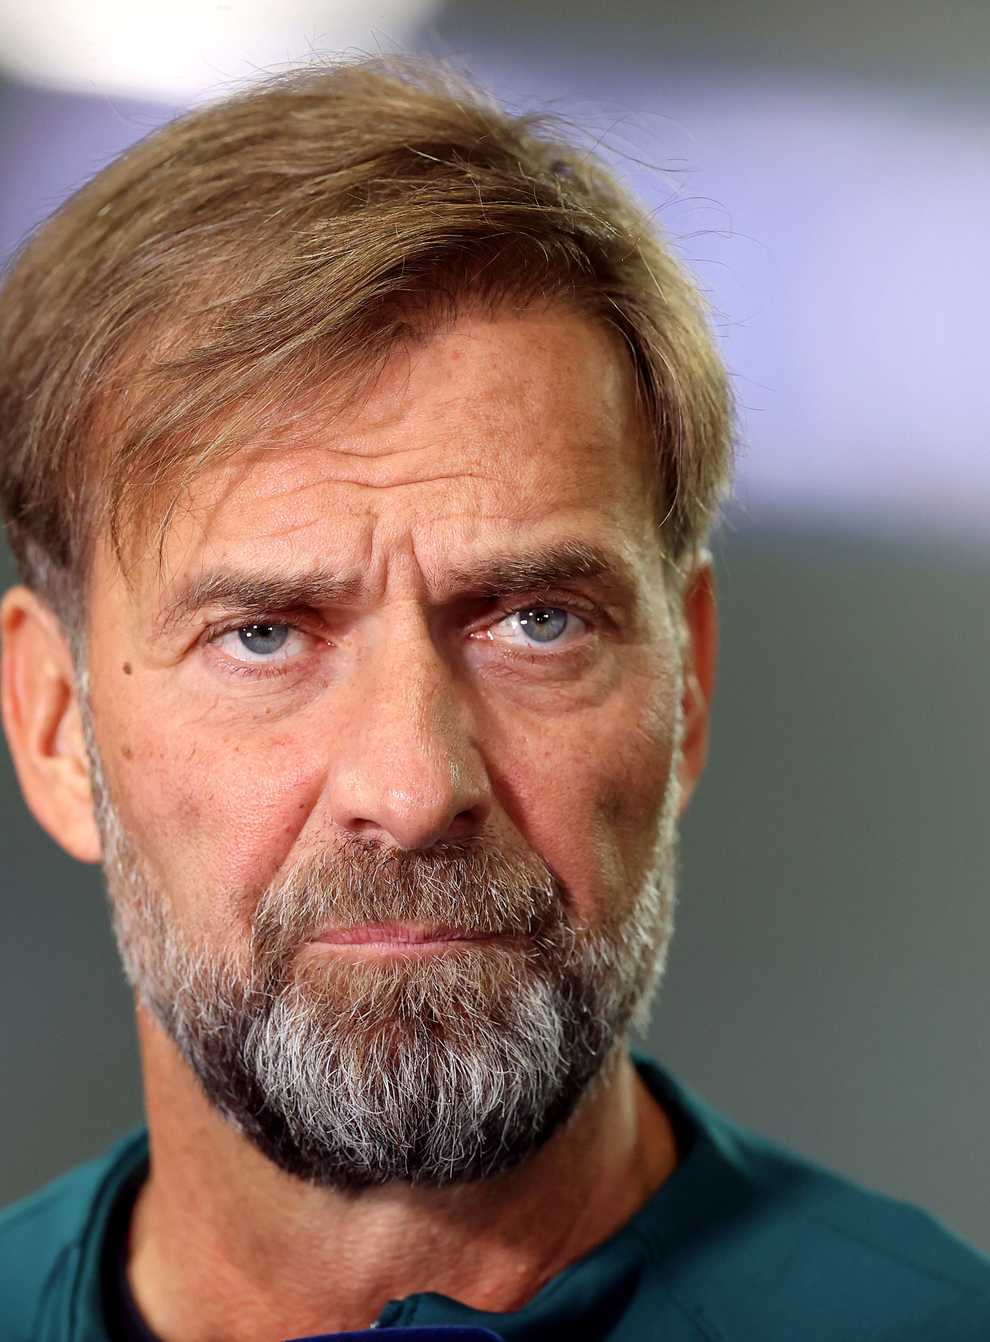 Jurgen Klopp said state-funded teams like Manchester City can ‘do what they want financially’ (Steve Welsh/PA)